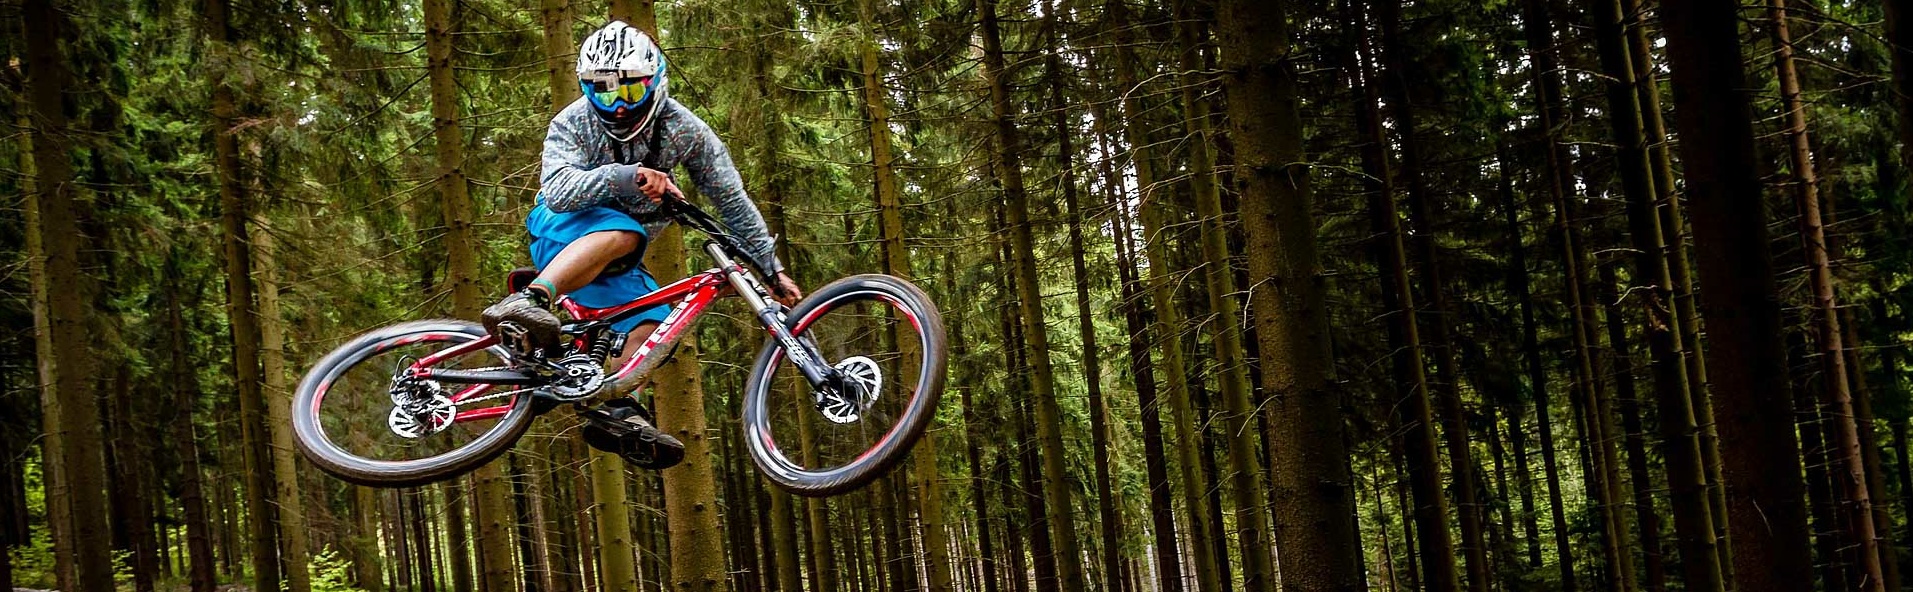 Biker jumps in a forest